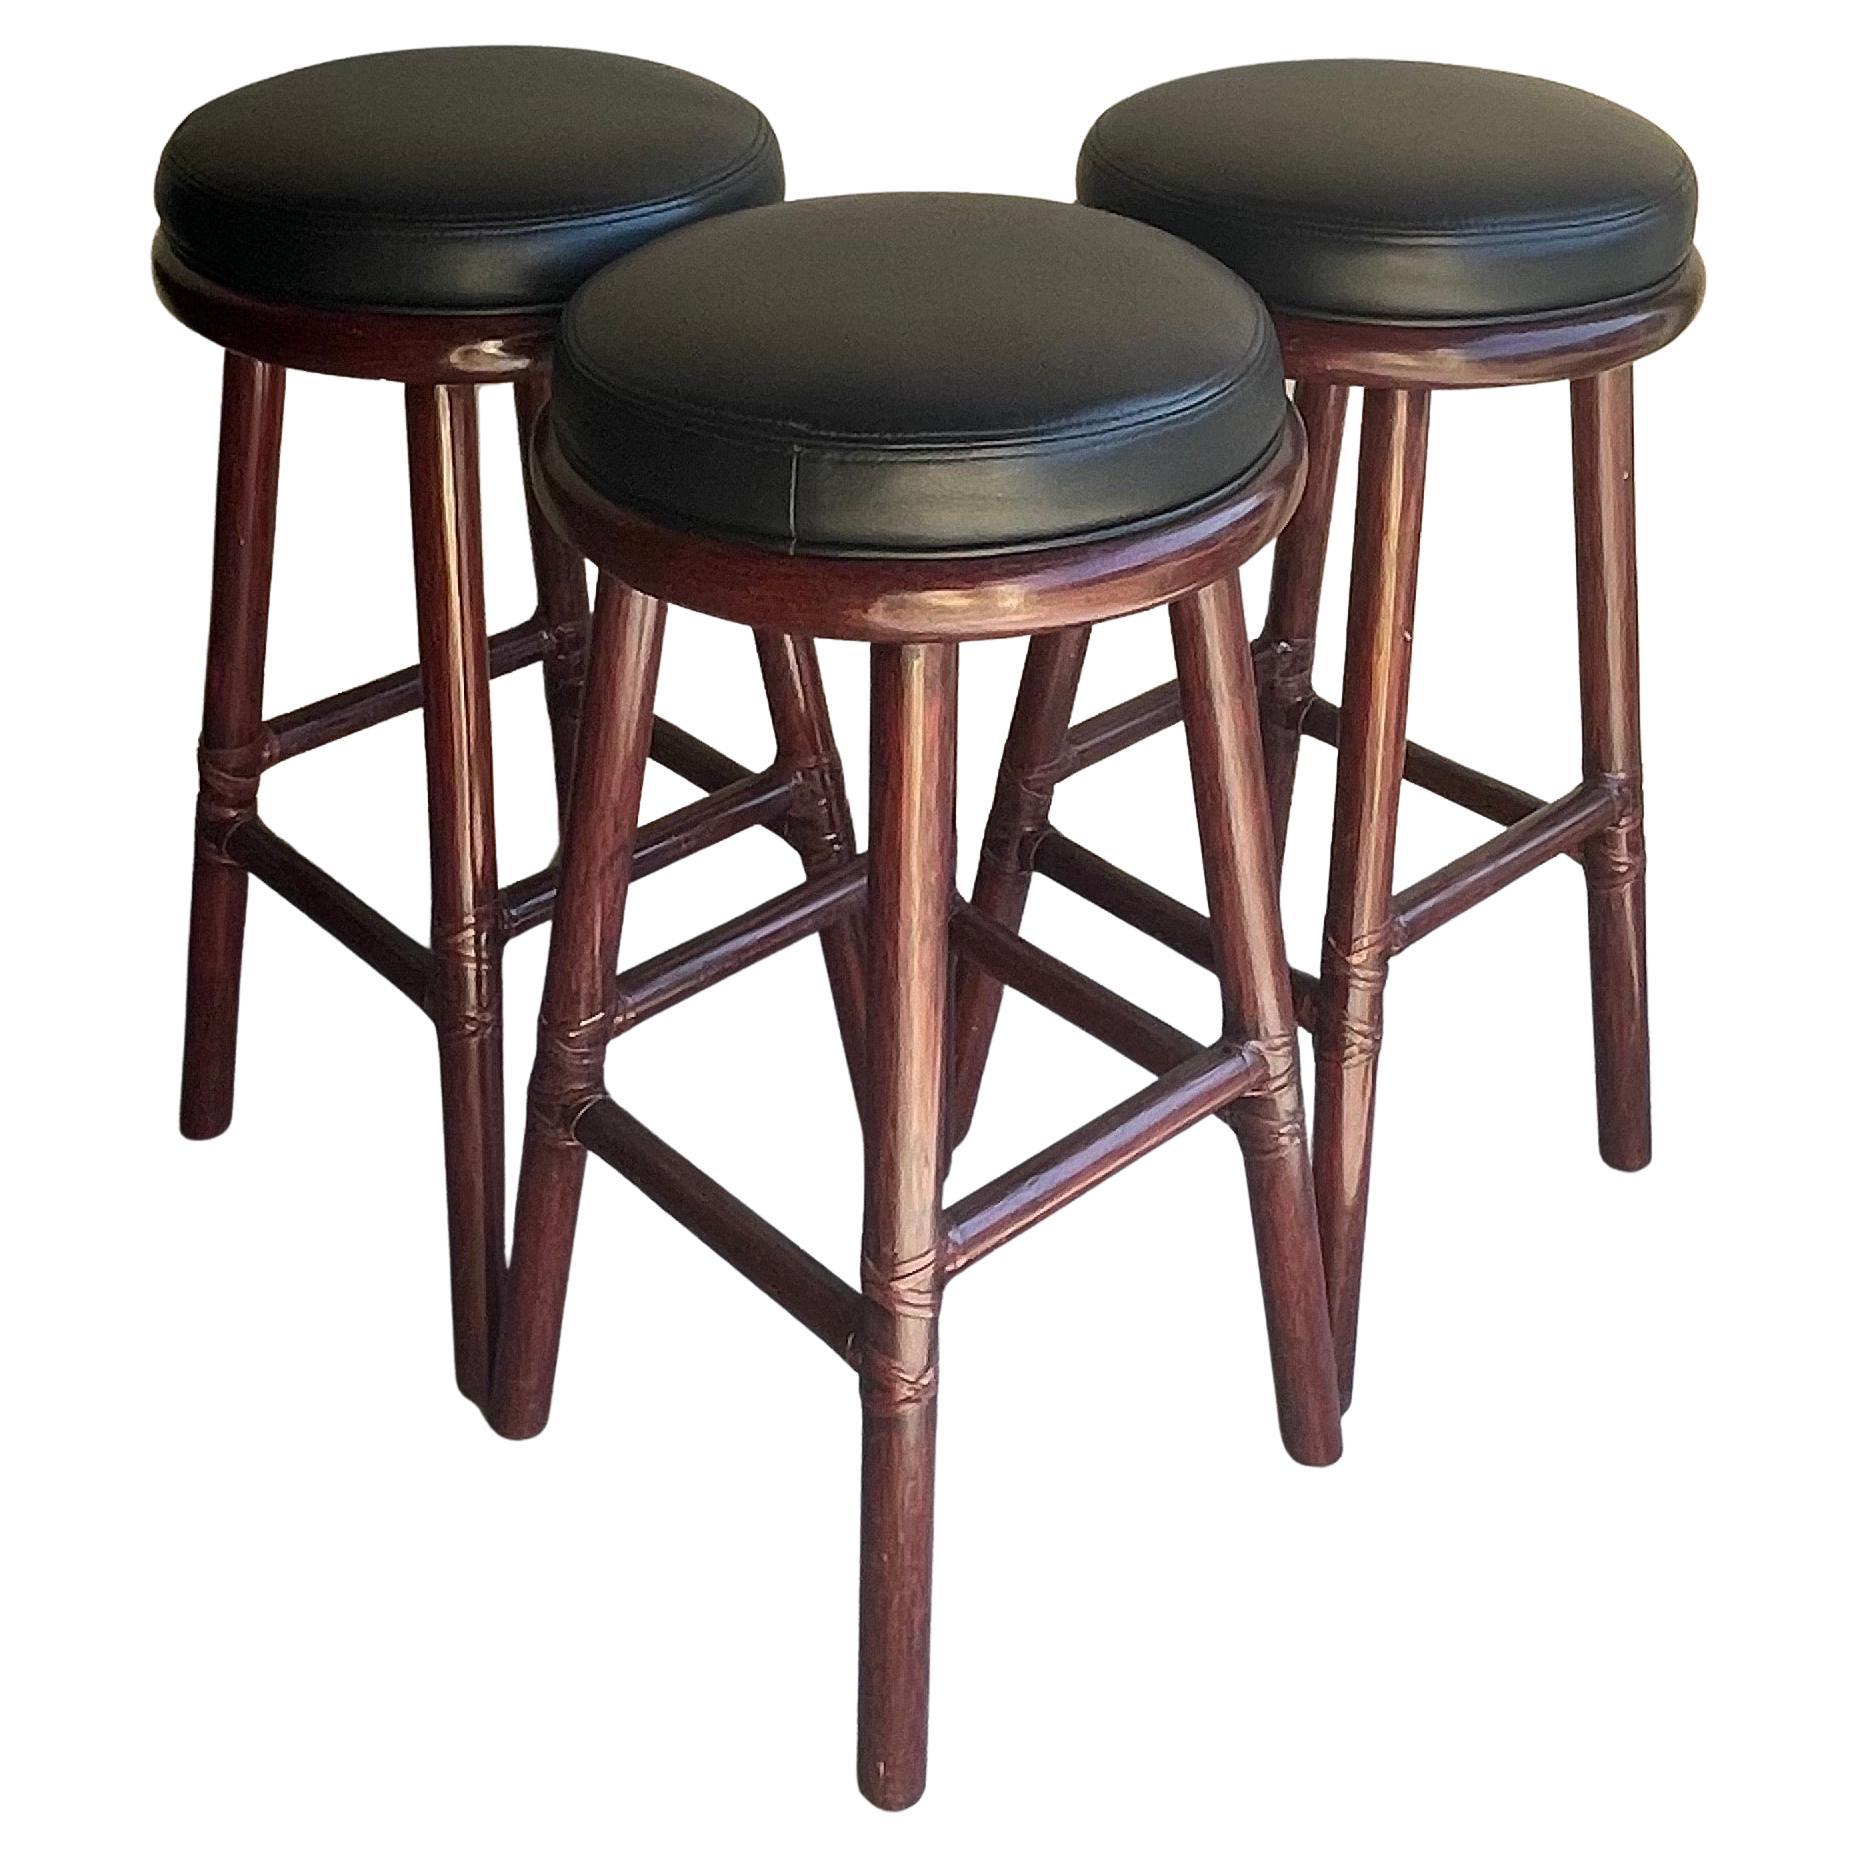 What kind of stool is good for a kitchen island?